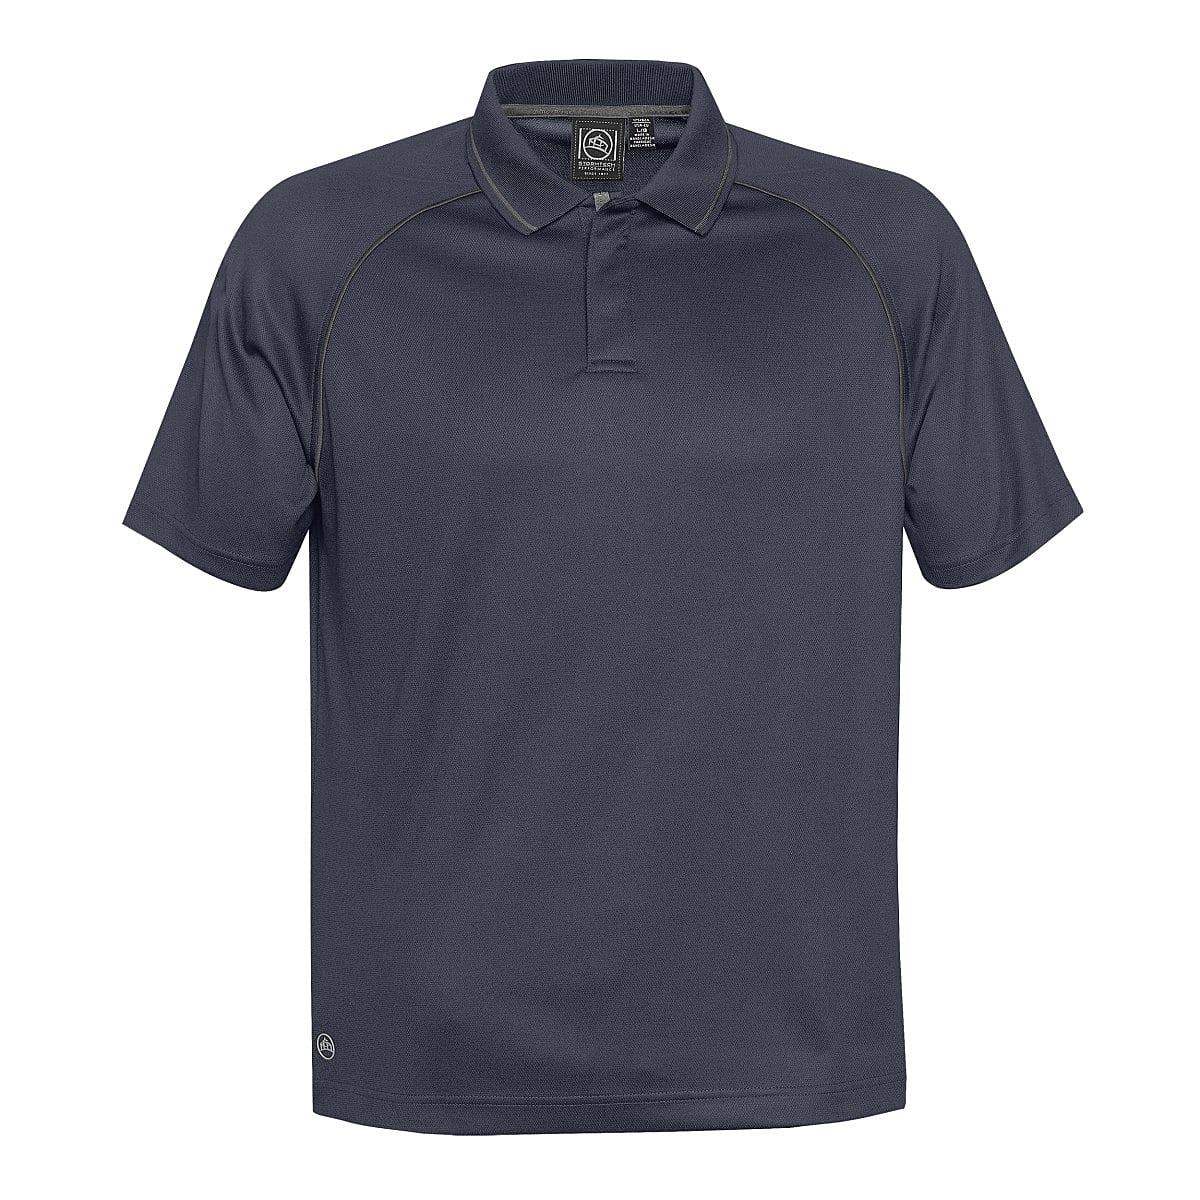 Stormtech Mens Tritium Polo Shirt in Navy / Carbon (Product Code: GPX-4)